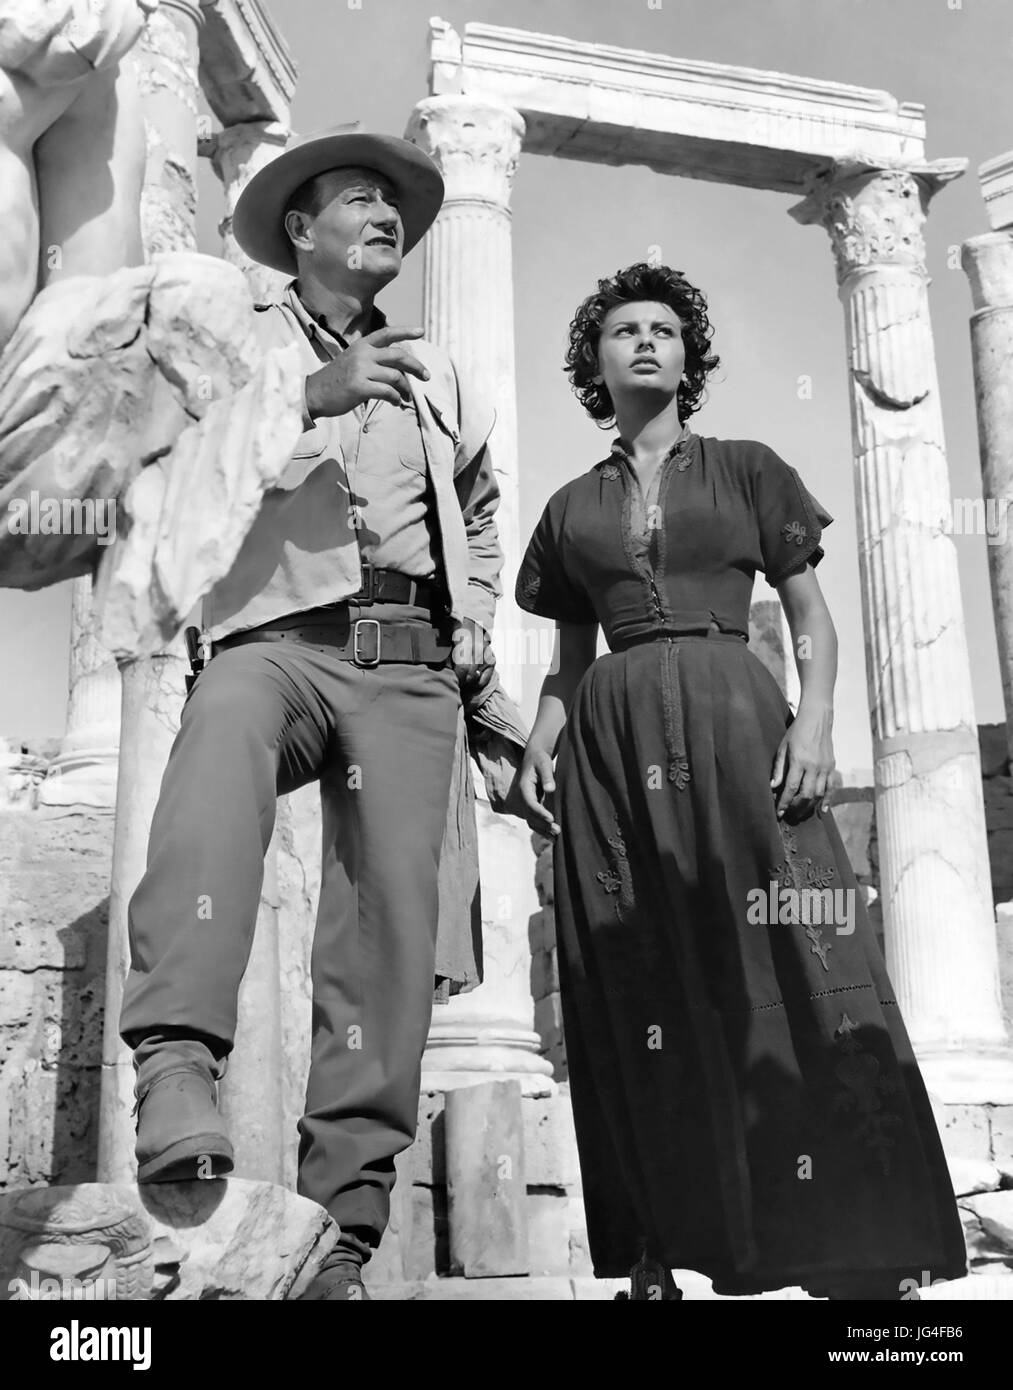 LEGEND OF THE LOST 1957 United Artists film with John Wayne and Sophia Loren Stock Photo